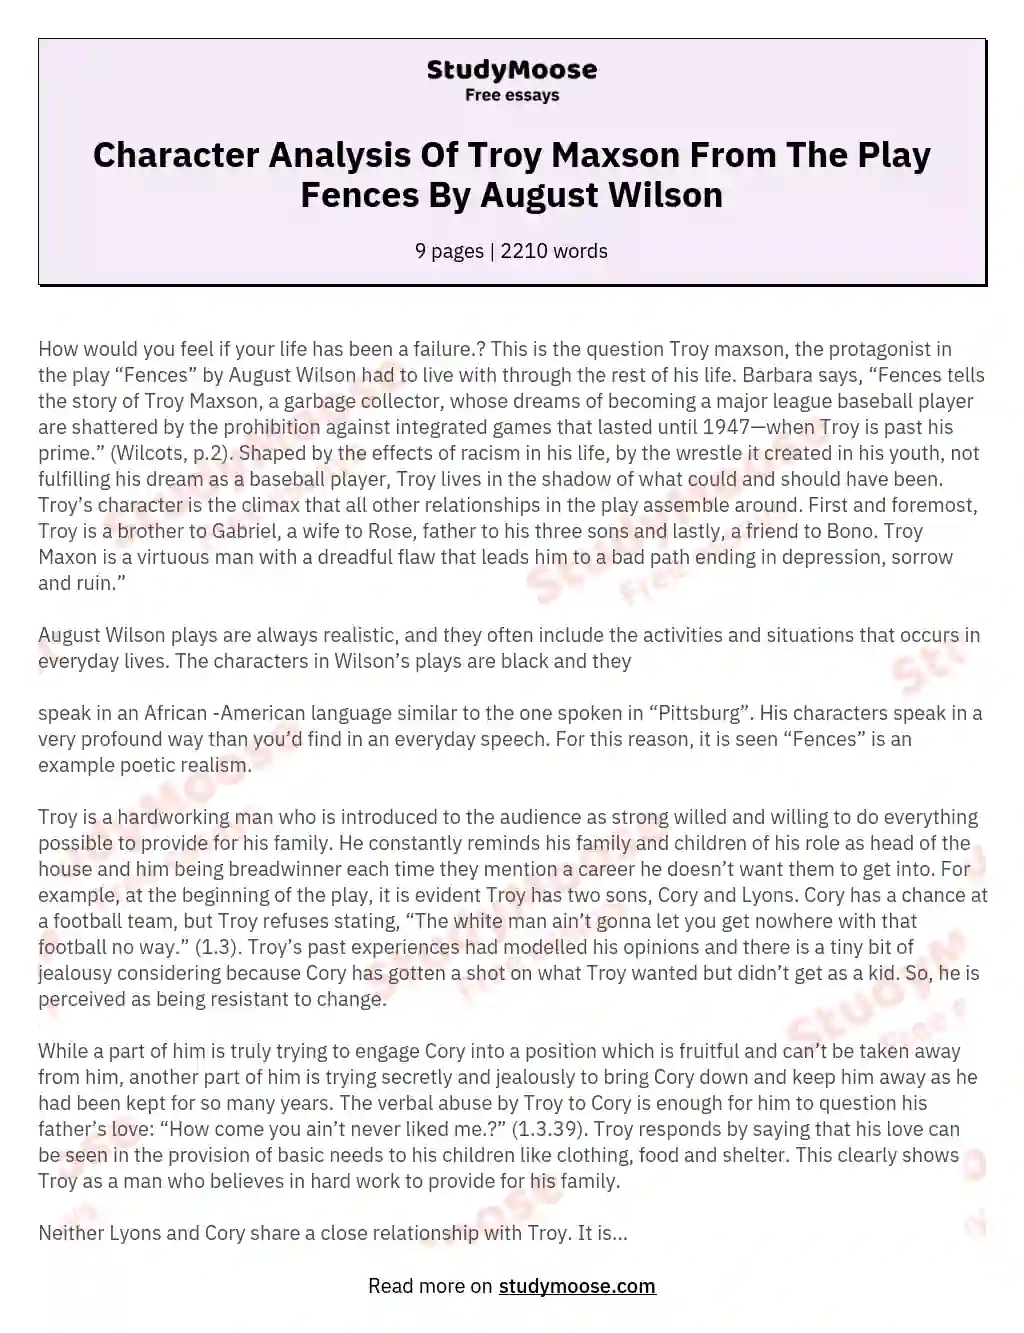 fences character analysis essay